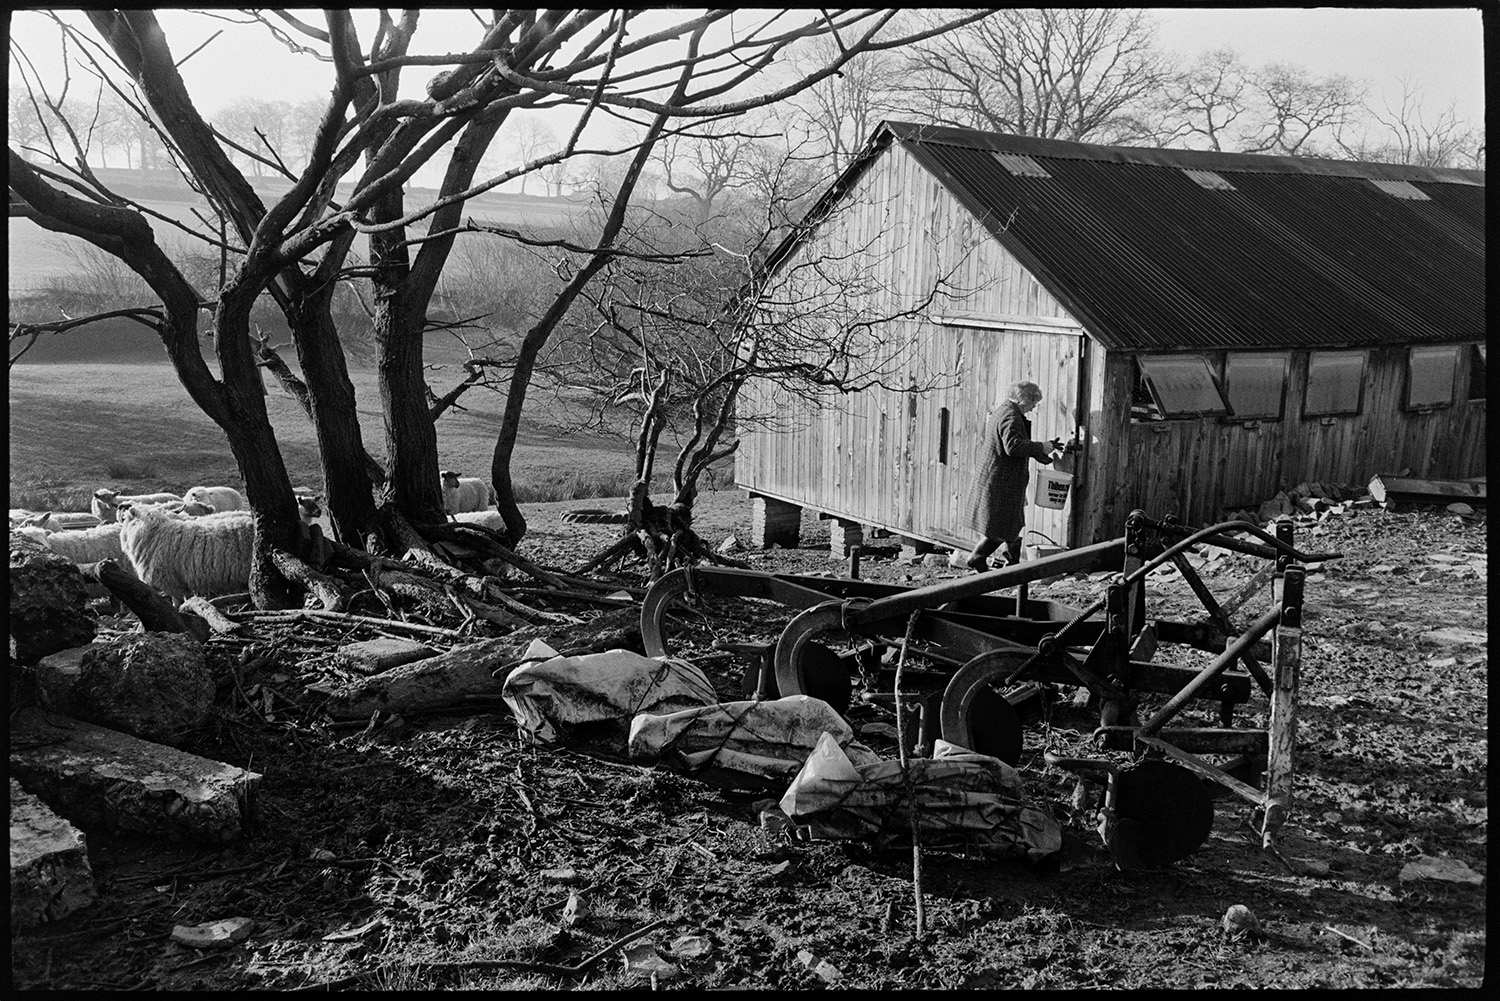 Farmyard, woman letting out poultry from houses, farm implements, morning light. 
[A woman opening up a large wooden poultry shed in a field at Lower Langham, Dolton. The poultry shed has windows and a corrugated iron roof. Sheep, trees and old farm machinery, possibly a harrow, can be seen in the field.